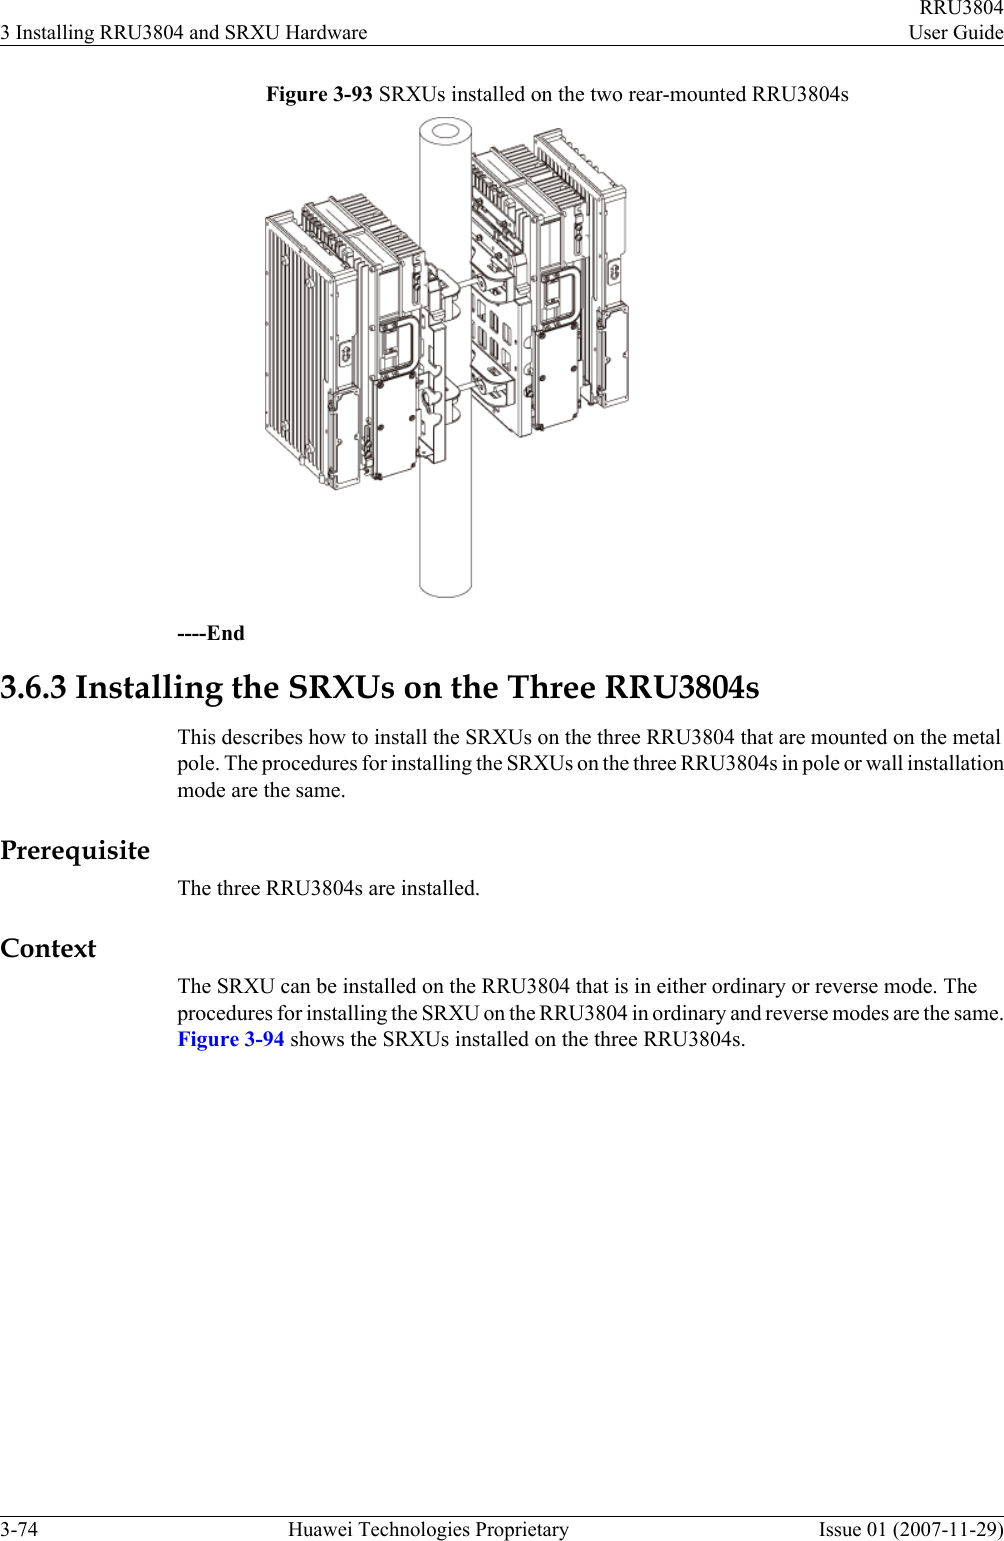 Figure 3-93 SRXUs installed on the two rear-mounted RRU3804s----End3.6.3 Installing the SRXUs on the Three RRU3804sThis describes how to install the SRXUs on the three RRU3804 that are mounted on the metalpole. The procedures for installing the SRXUs on the three RRU3804s in pole or wall installationmode are the same.PrerequisiteThe three RRU3804s are installed.ContextThe SRXU can be installed on the RRU3804 that is in either ordinary or reverse mode. Theprocedures for installing the SRXU on the RRU3804 in ordinary and reverse modes are the same.Figure 3-94 shows the SRXUs installed on the three RRU3804s.3 Installing RRU3804 and SRXU HardwareRRU3804User Guide3-74 Huawei Technologies Proprietary Issue 01 (2007-11-29)